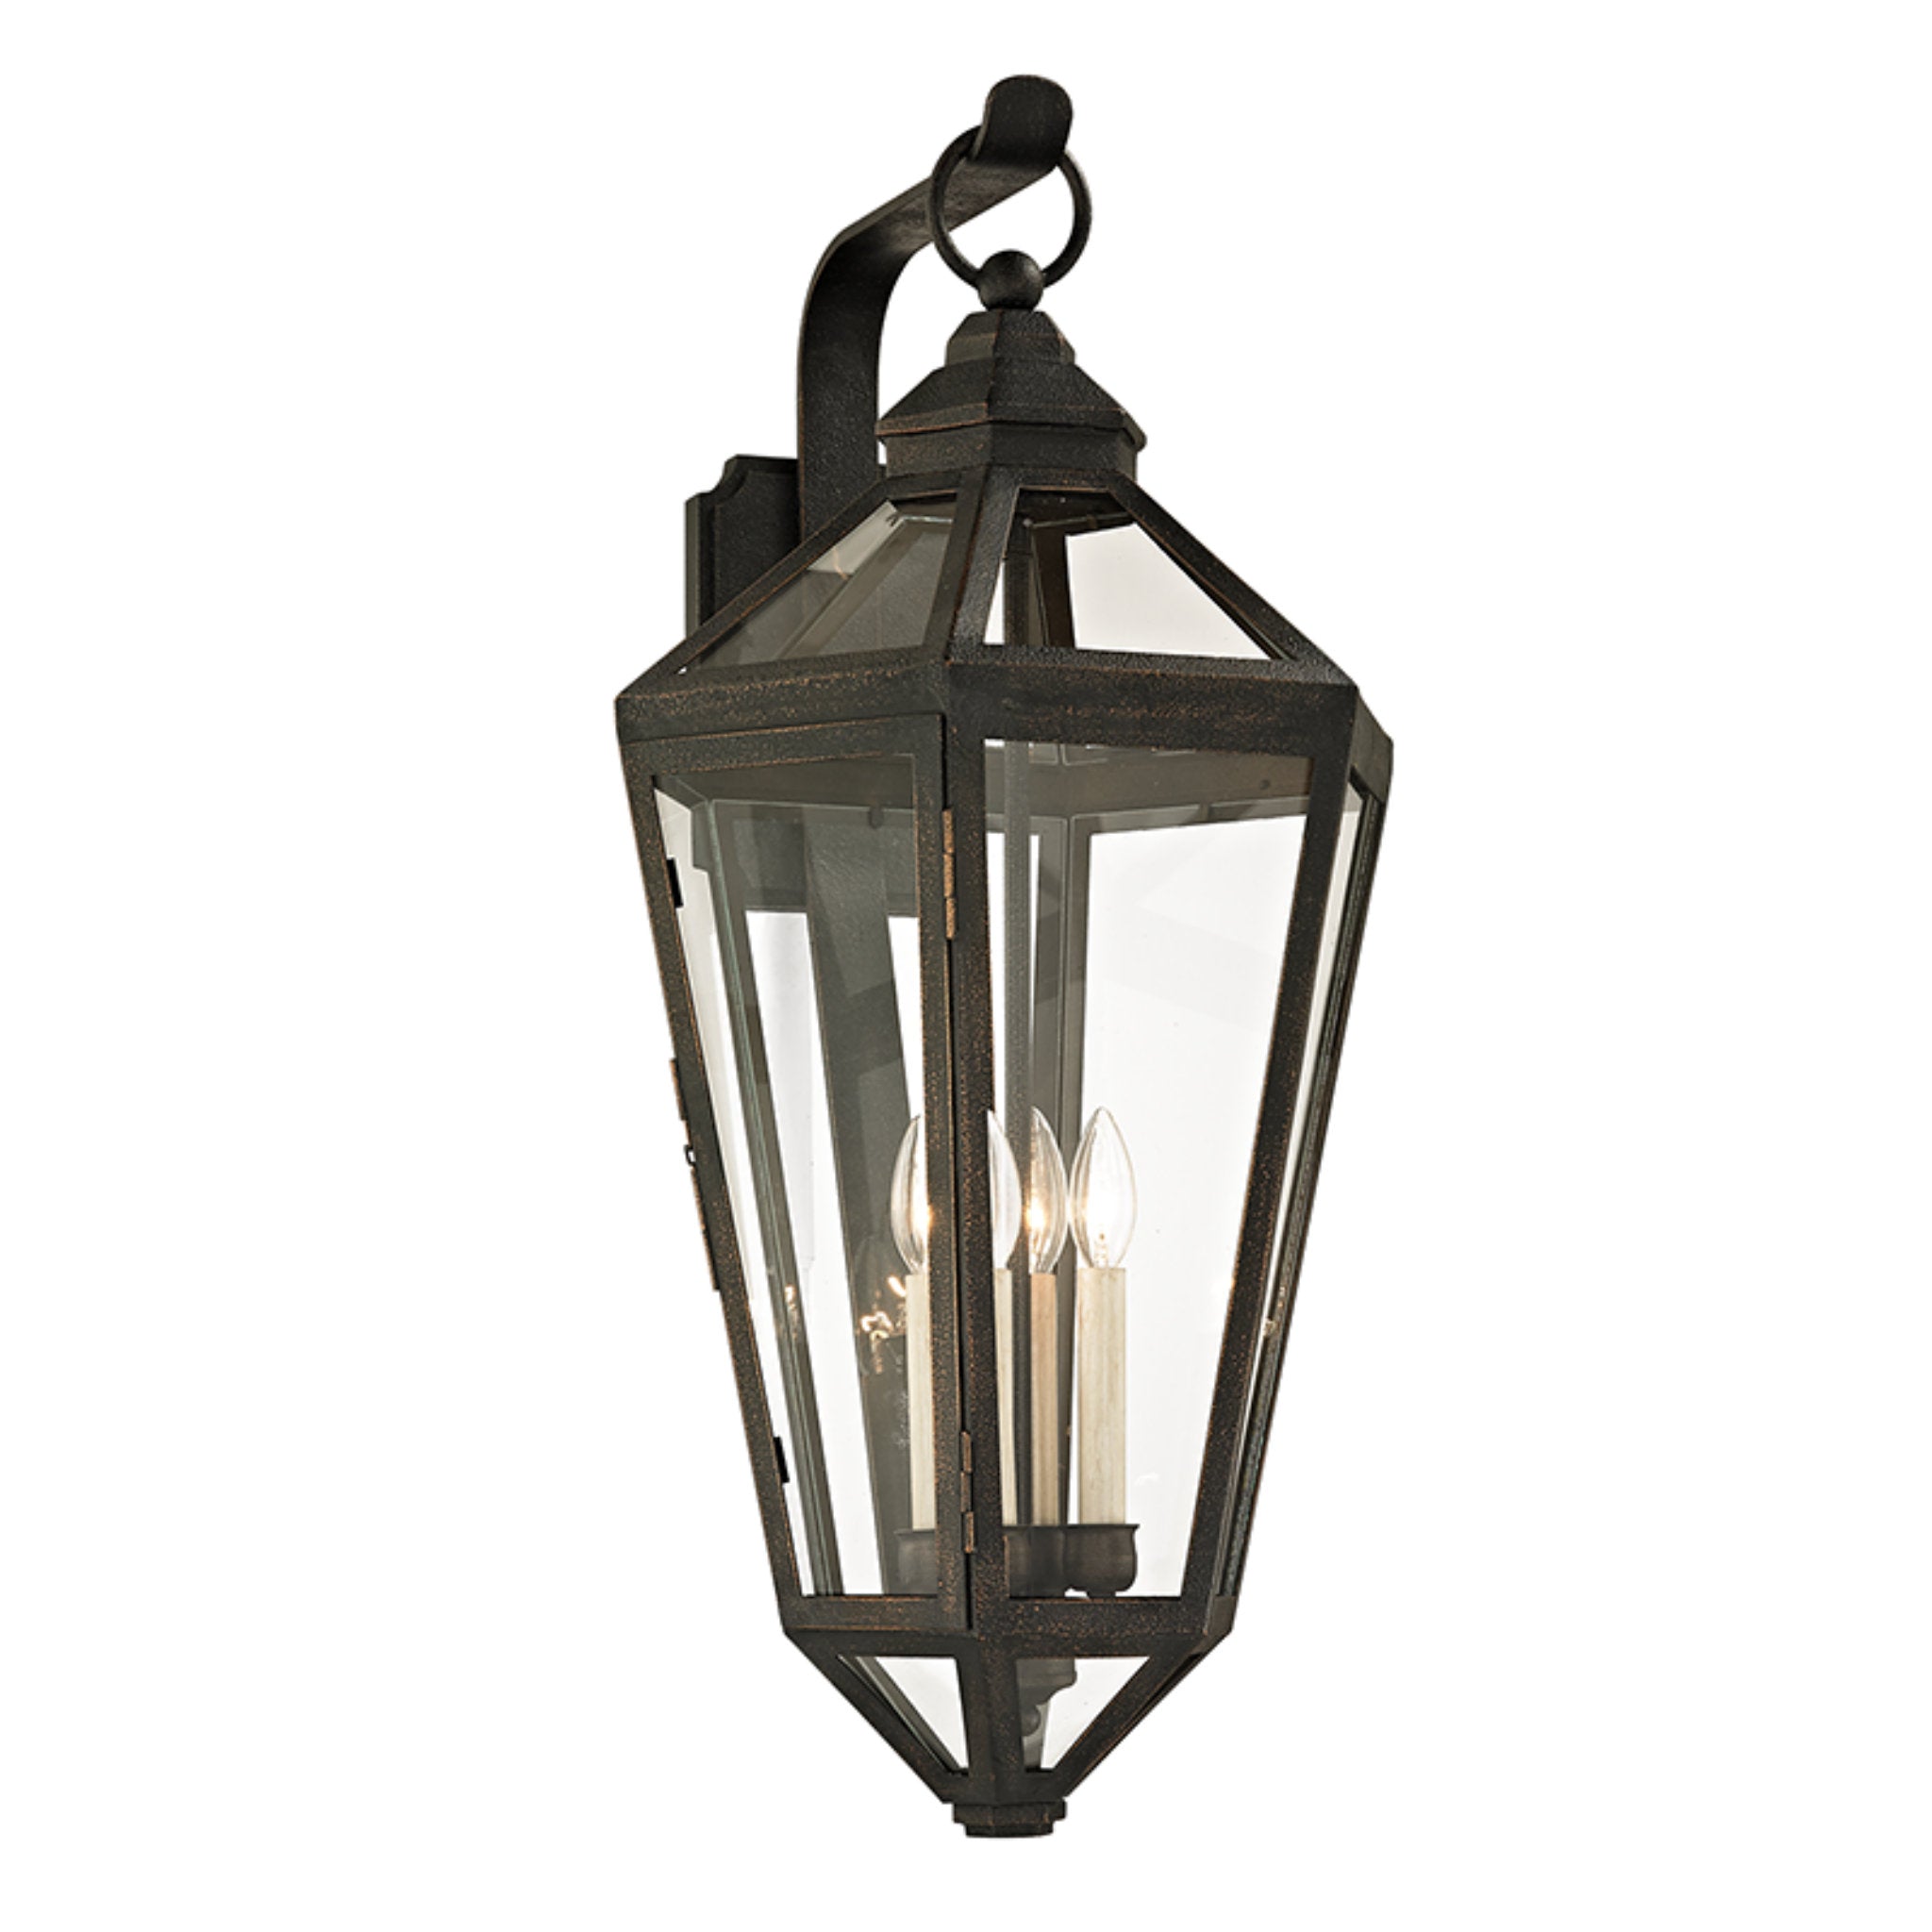 Calabasas 4 Light Wall Sconce in Vintage Bronze